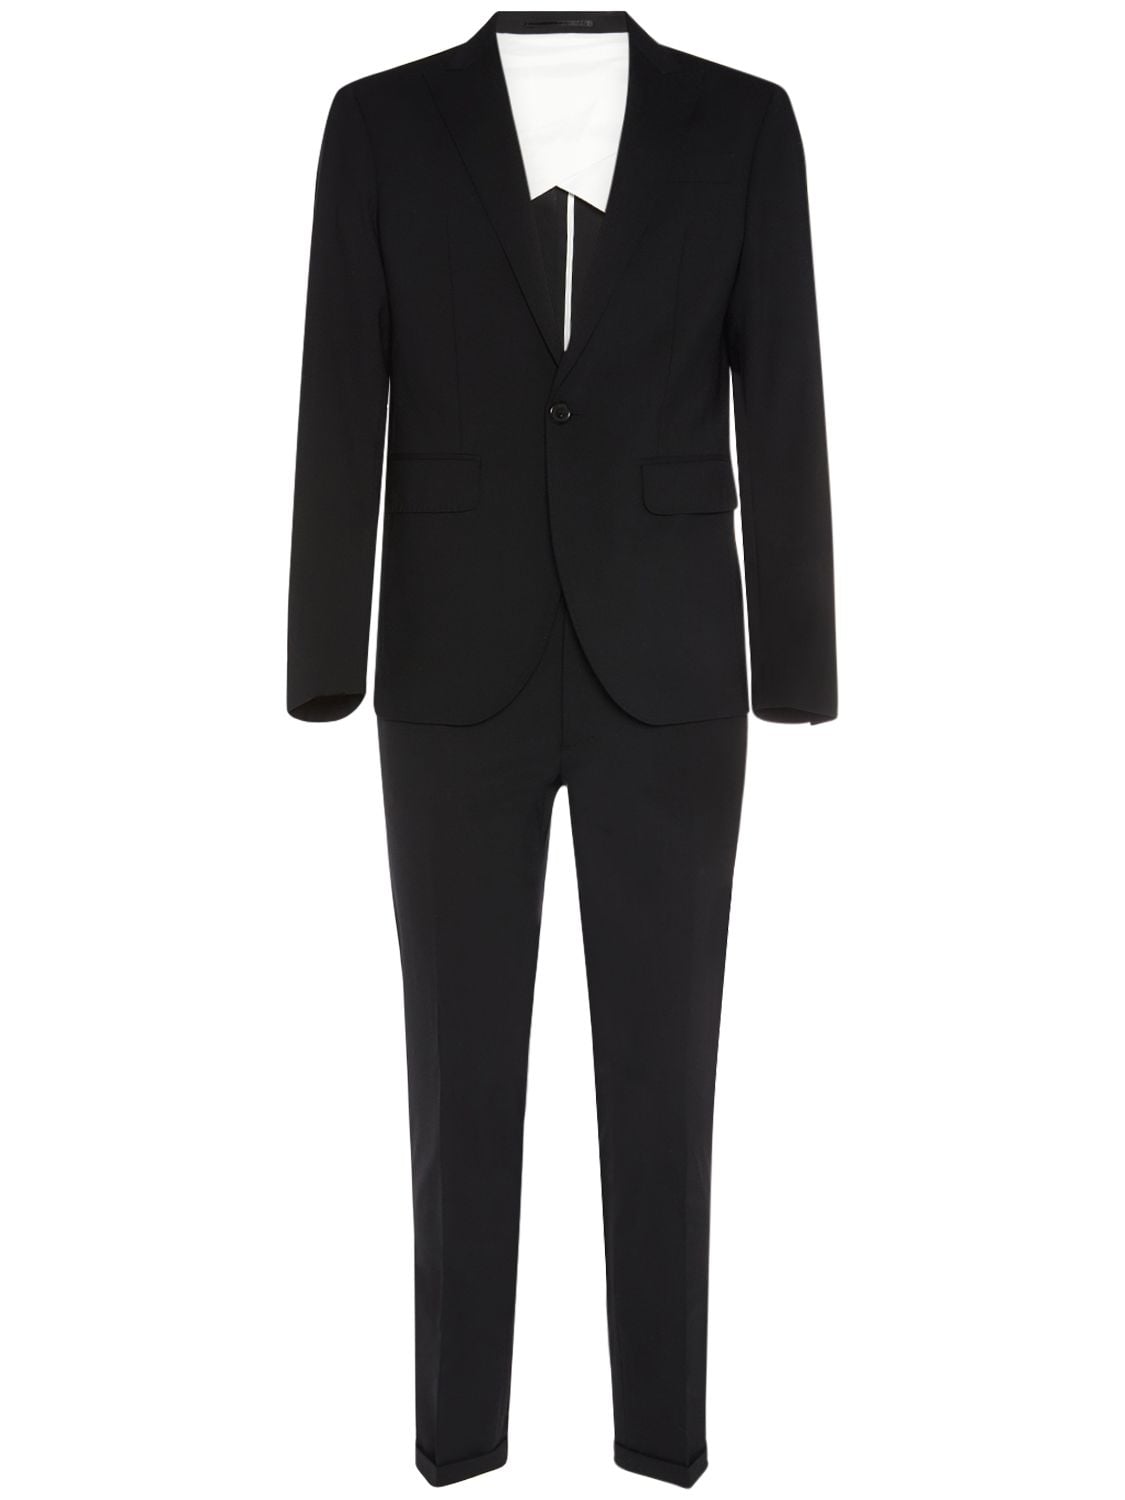 Image of Tokyo Fit Single Breasted Wool Suit